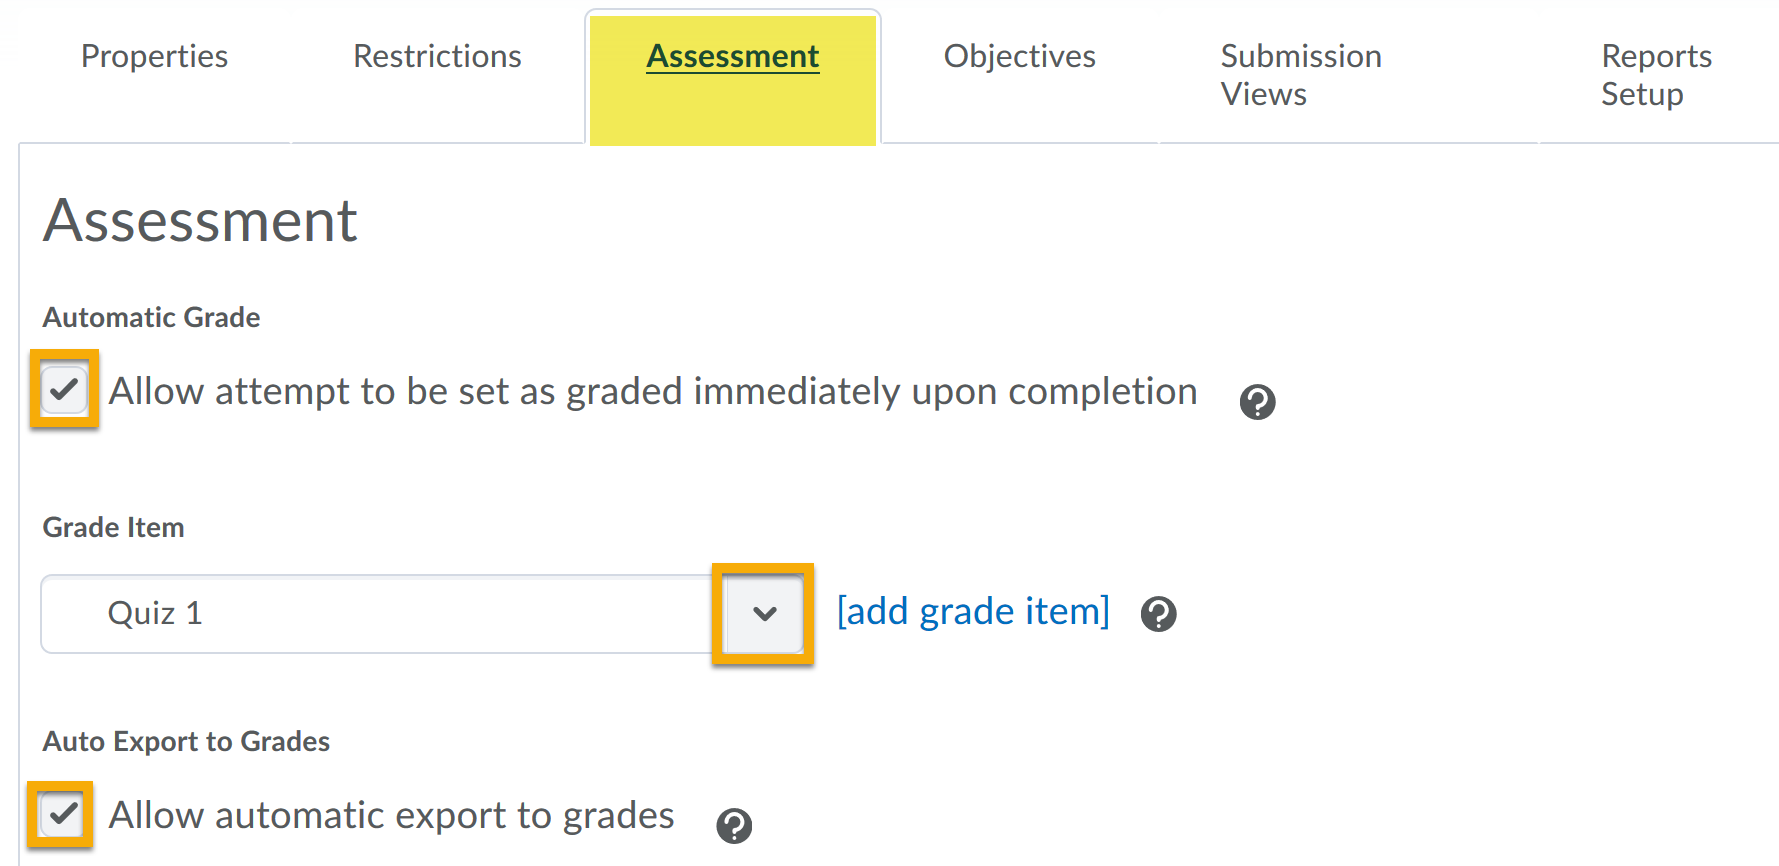 Assessment tab highlighted. Checkboxes selected for Automatic Grades and Auto Export to Grades.